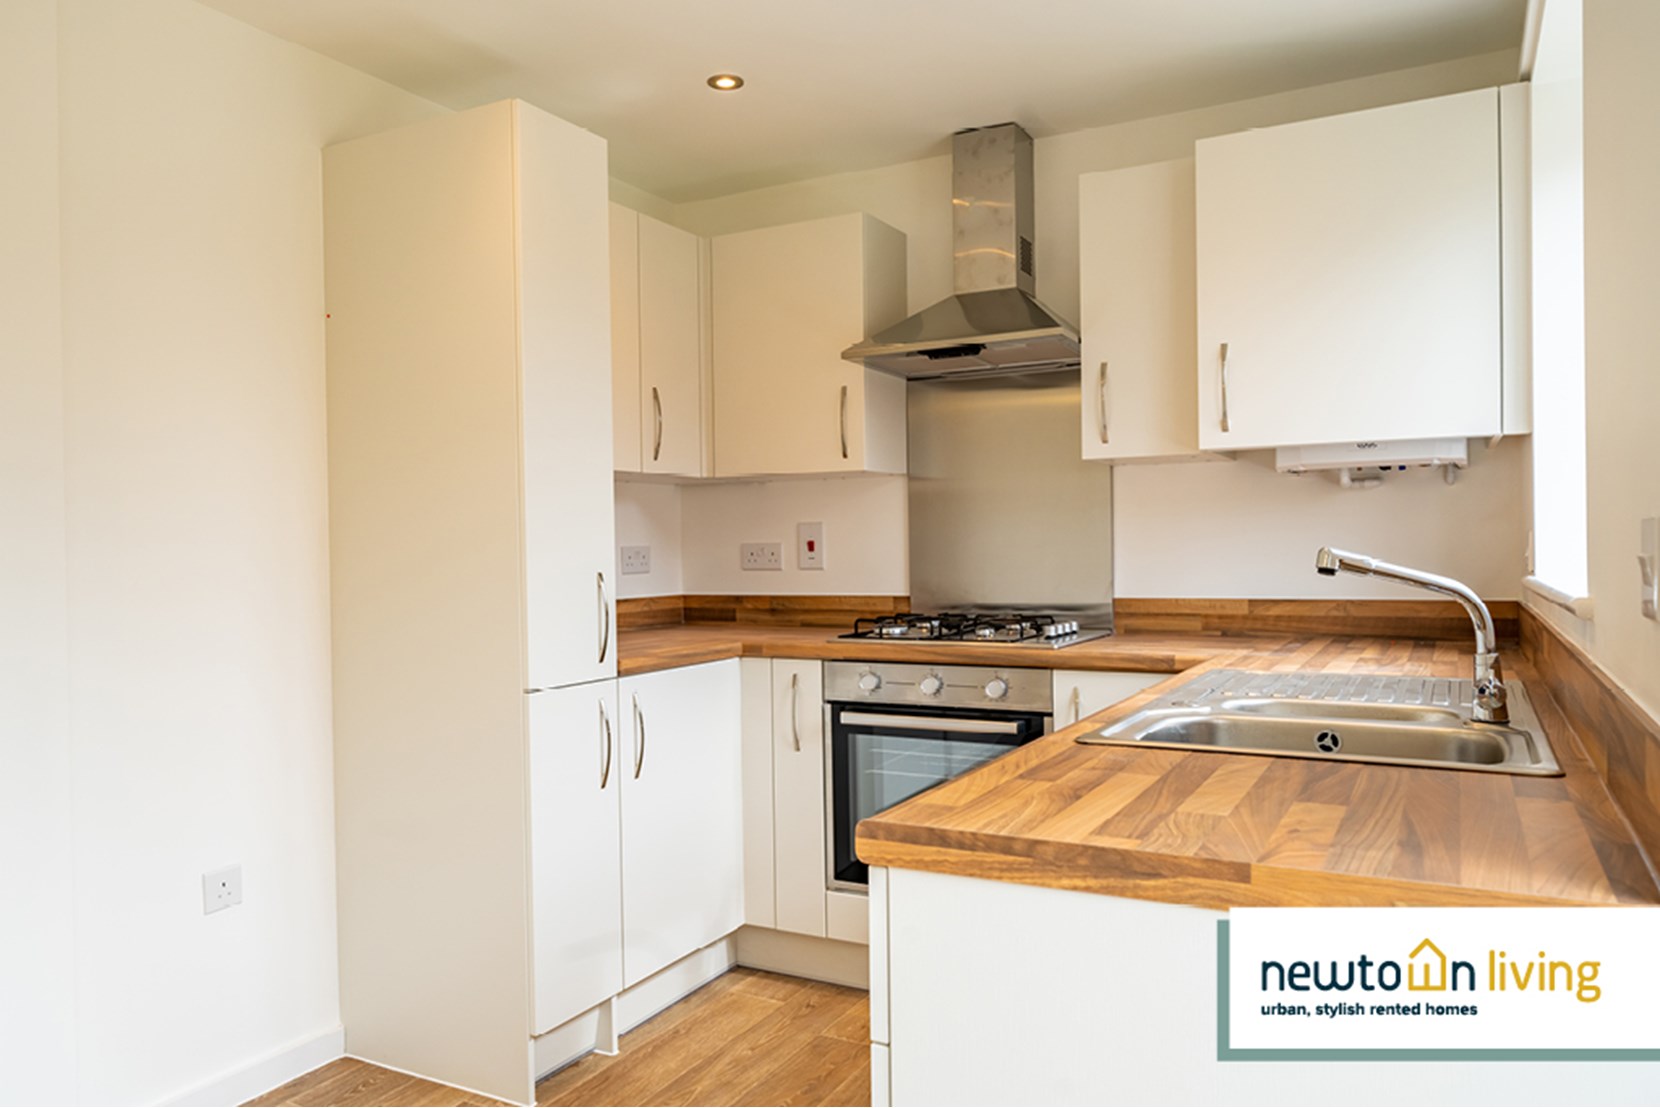 Houses to Rent by Newton Living at Lock 44, Leicester, LE4, kitchen